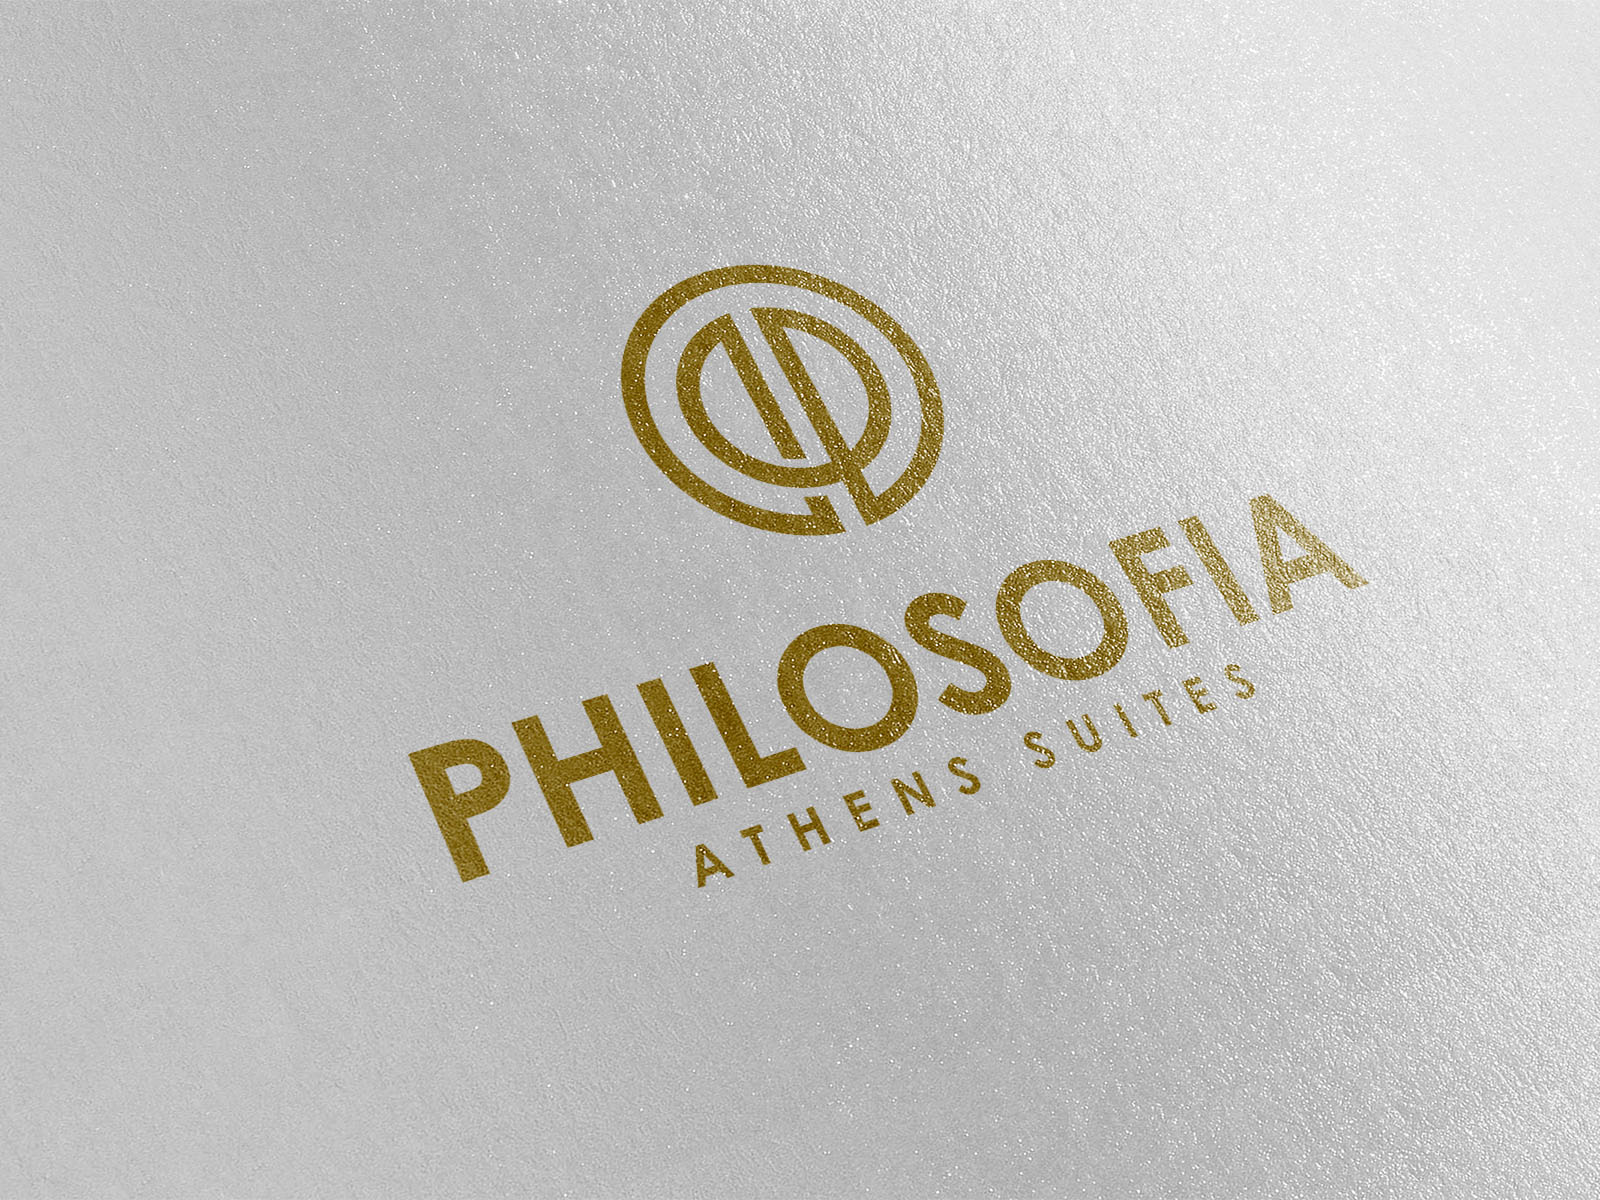 SOPA Images - Gallery - Brands & Logos in Athens, Greece